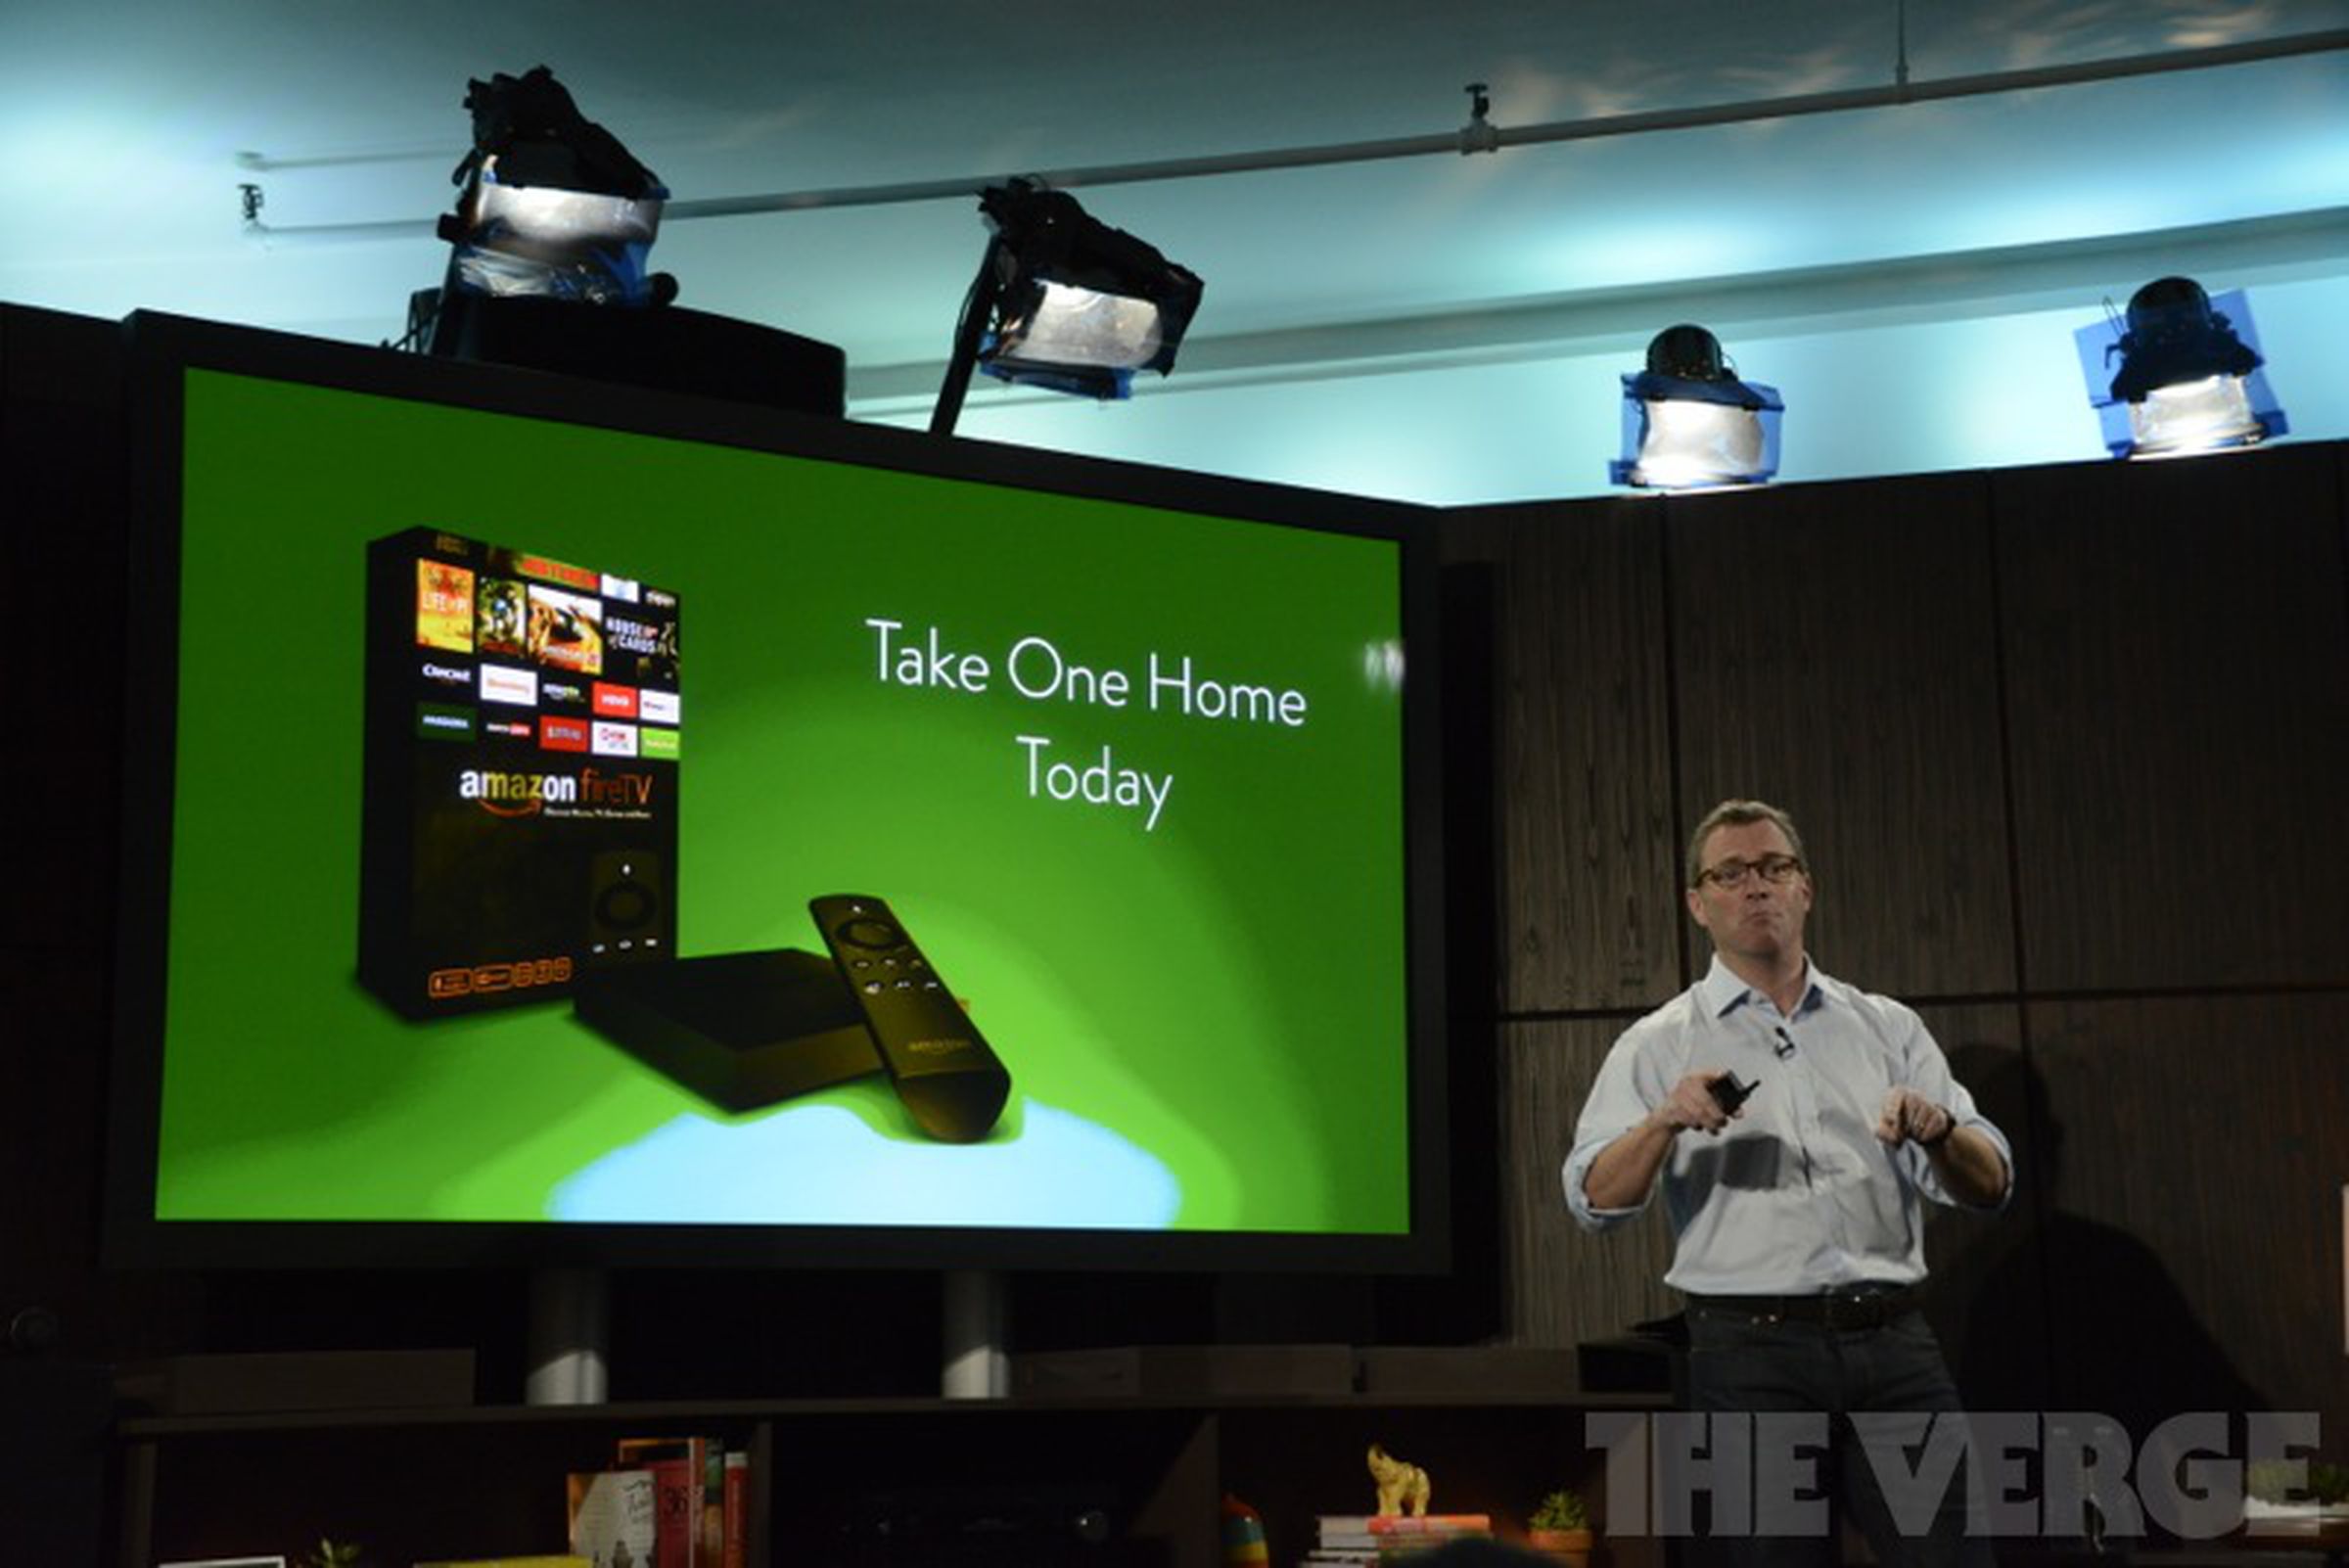 Photos of Amazon's FireTV from their 'video business' event